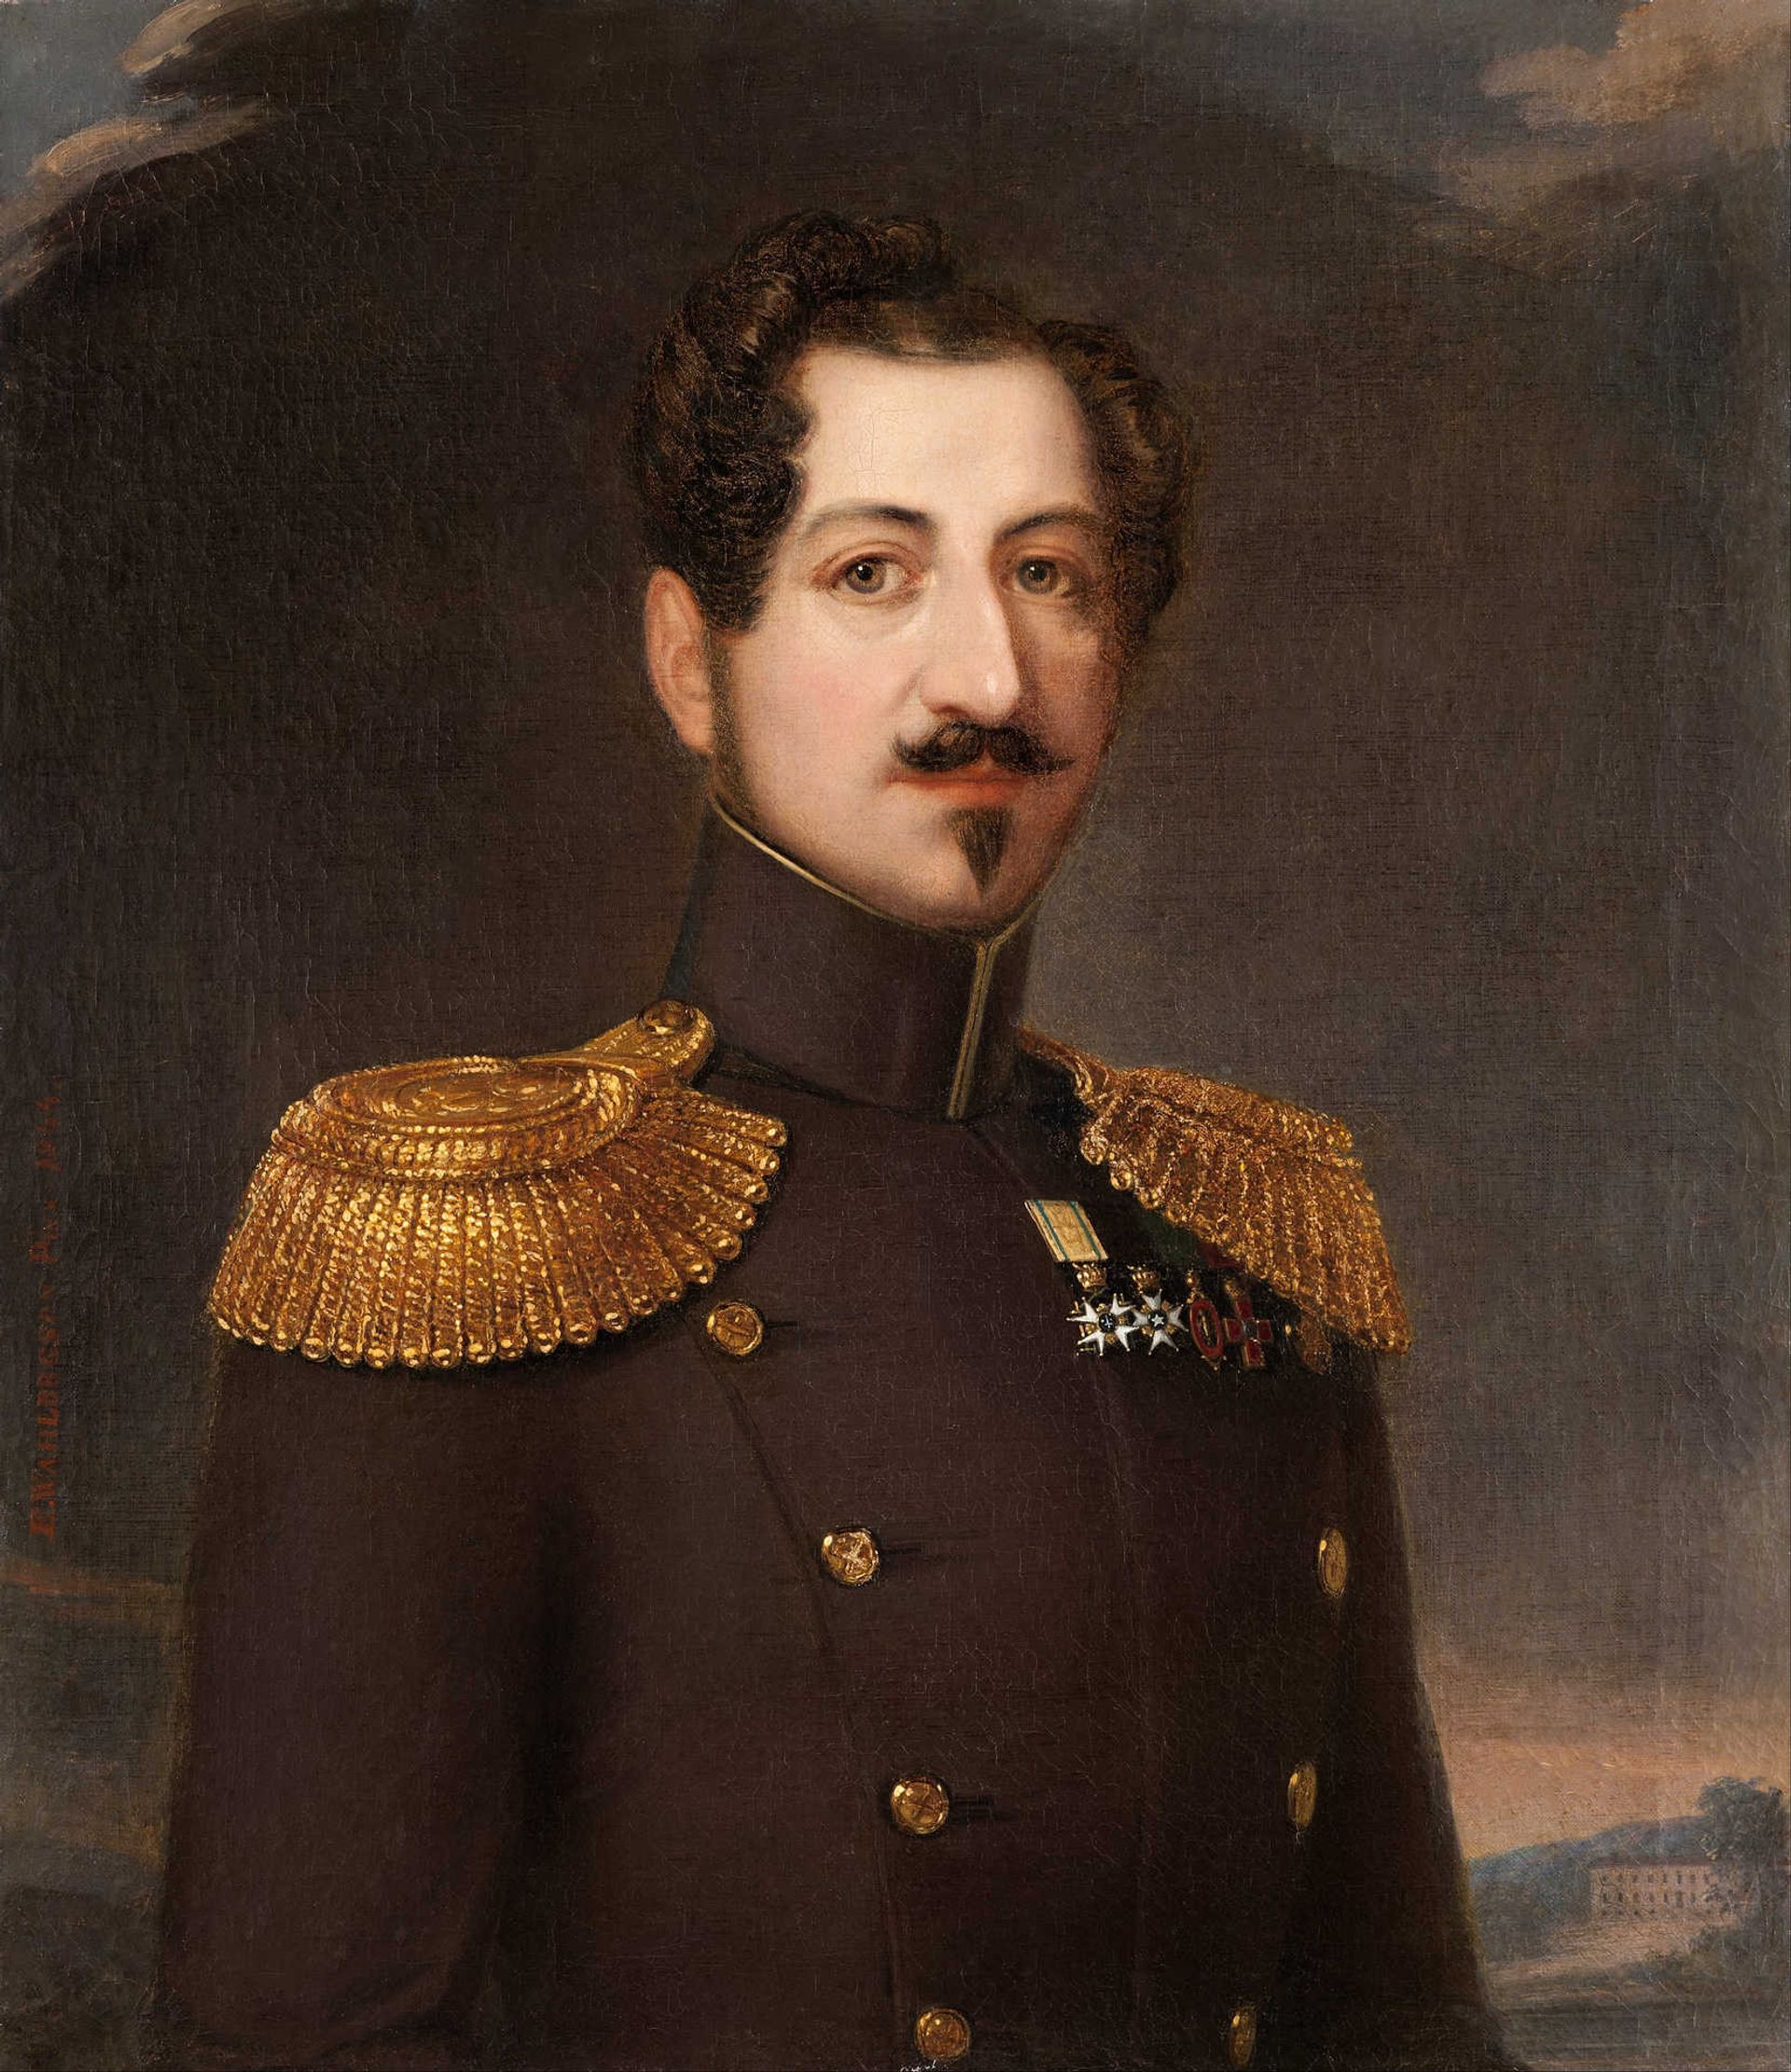 Oscar_I-_King_of_Sweden_and_Norway_1844-1859_-_Google_Art_Project.jpg